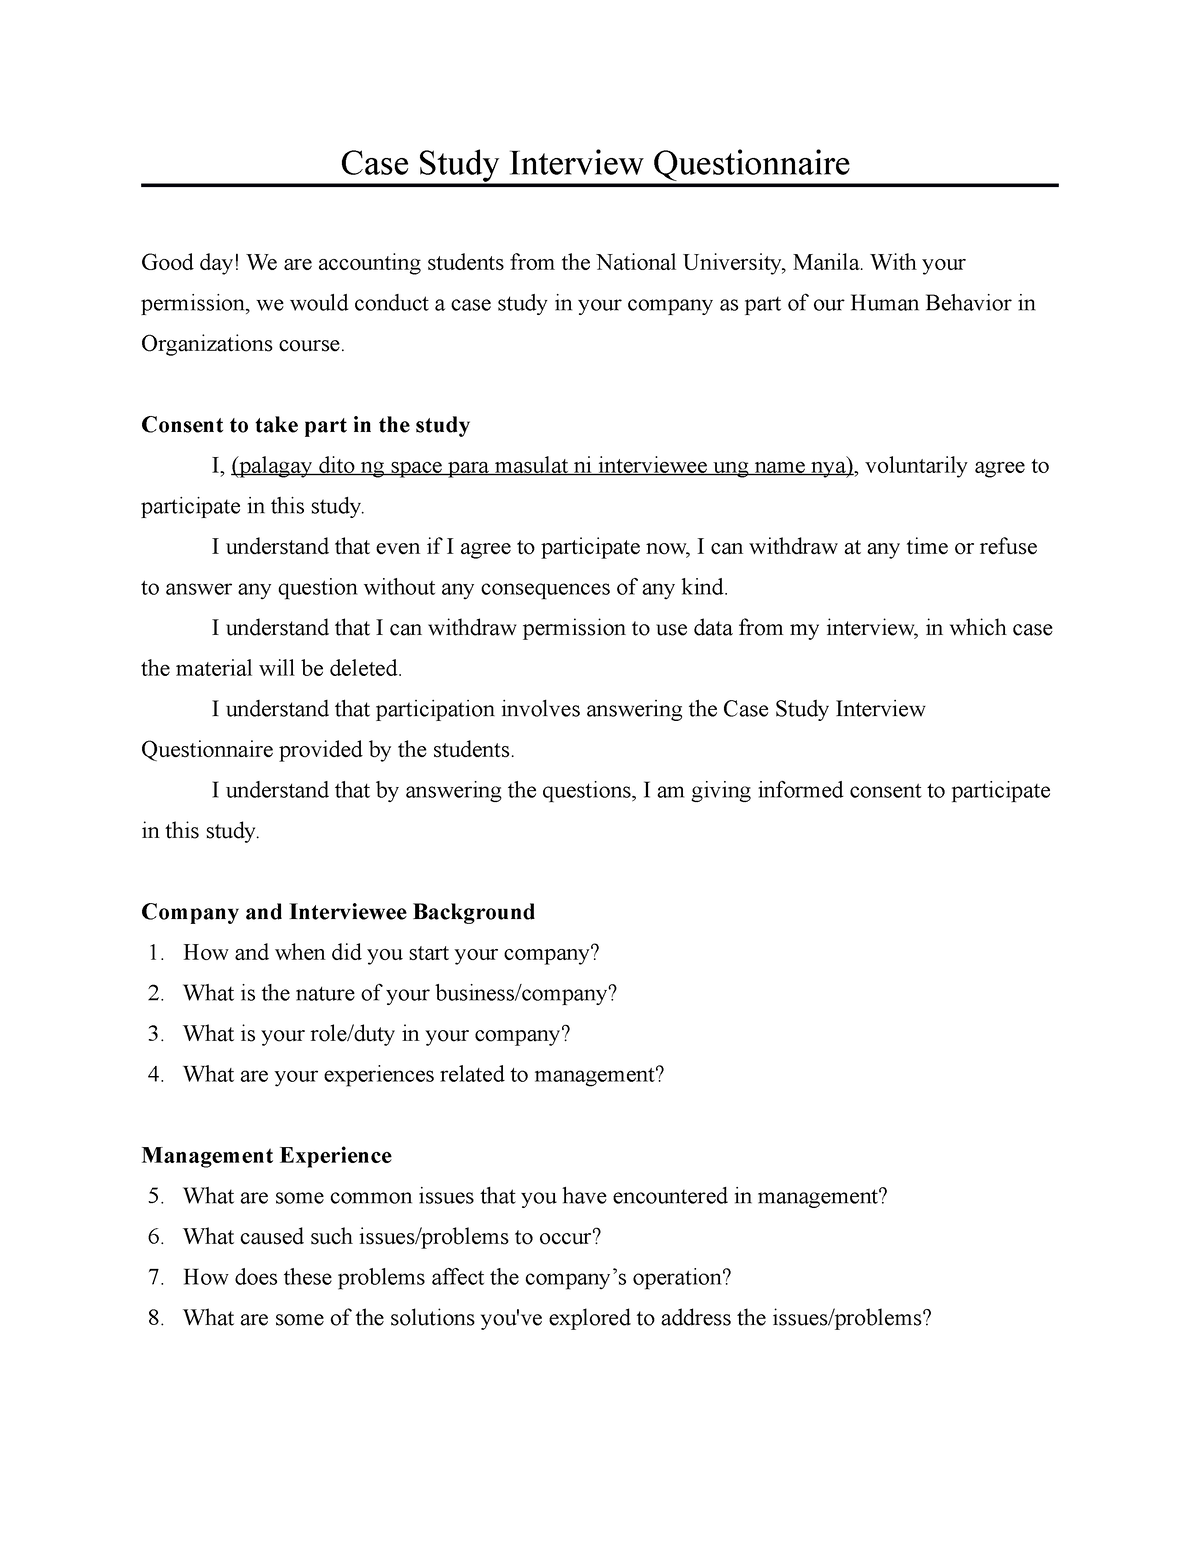 case study questionnaire for students